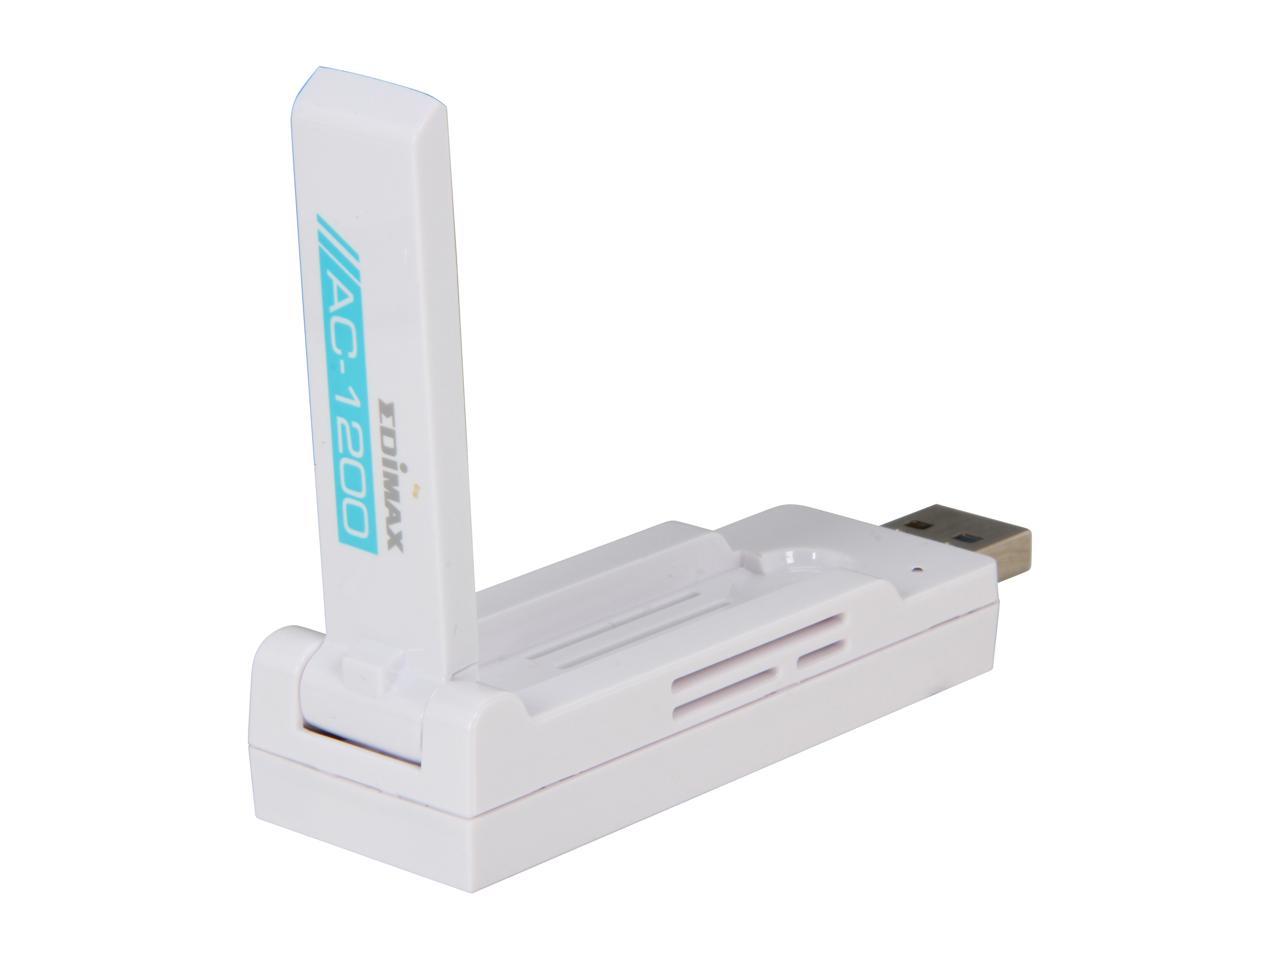 Edimax EW-7822UAC Wireless AC1200 Dual-band USB 3.0 Adapter, Complies to Draft 802.11ac Standard, Delivers More Than Two Times Faster Wi-Fi Speed Than 802.11n, With Adjustable Foldaway Antenna for Optimum High Performance